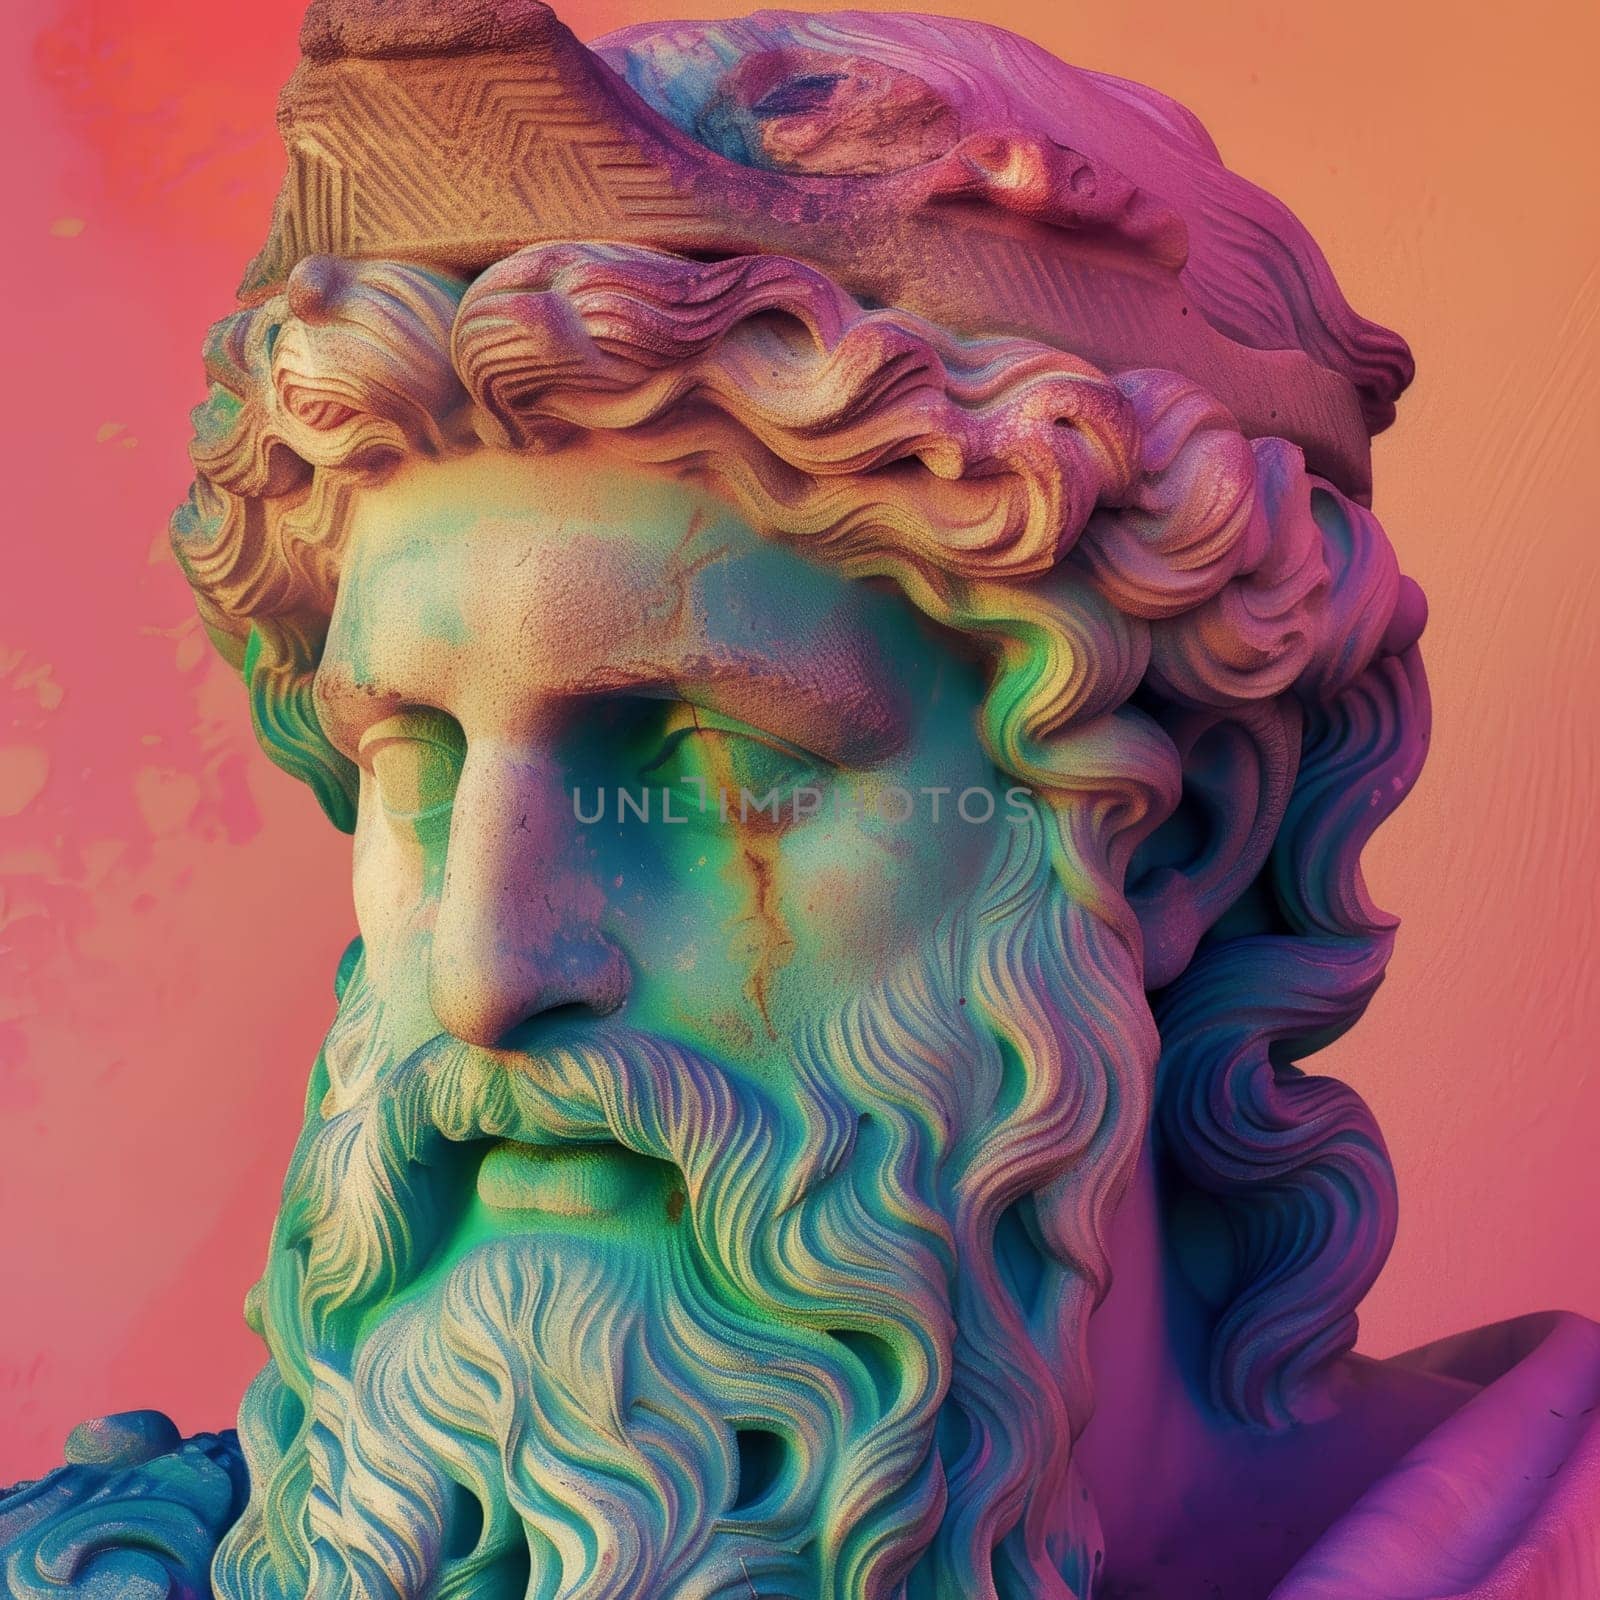 Classical statue illuminated with vibrant neon colors in an artistic display. by sfinks